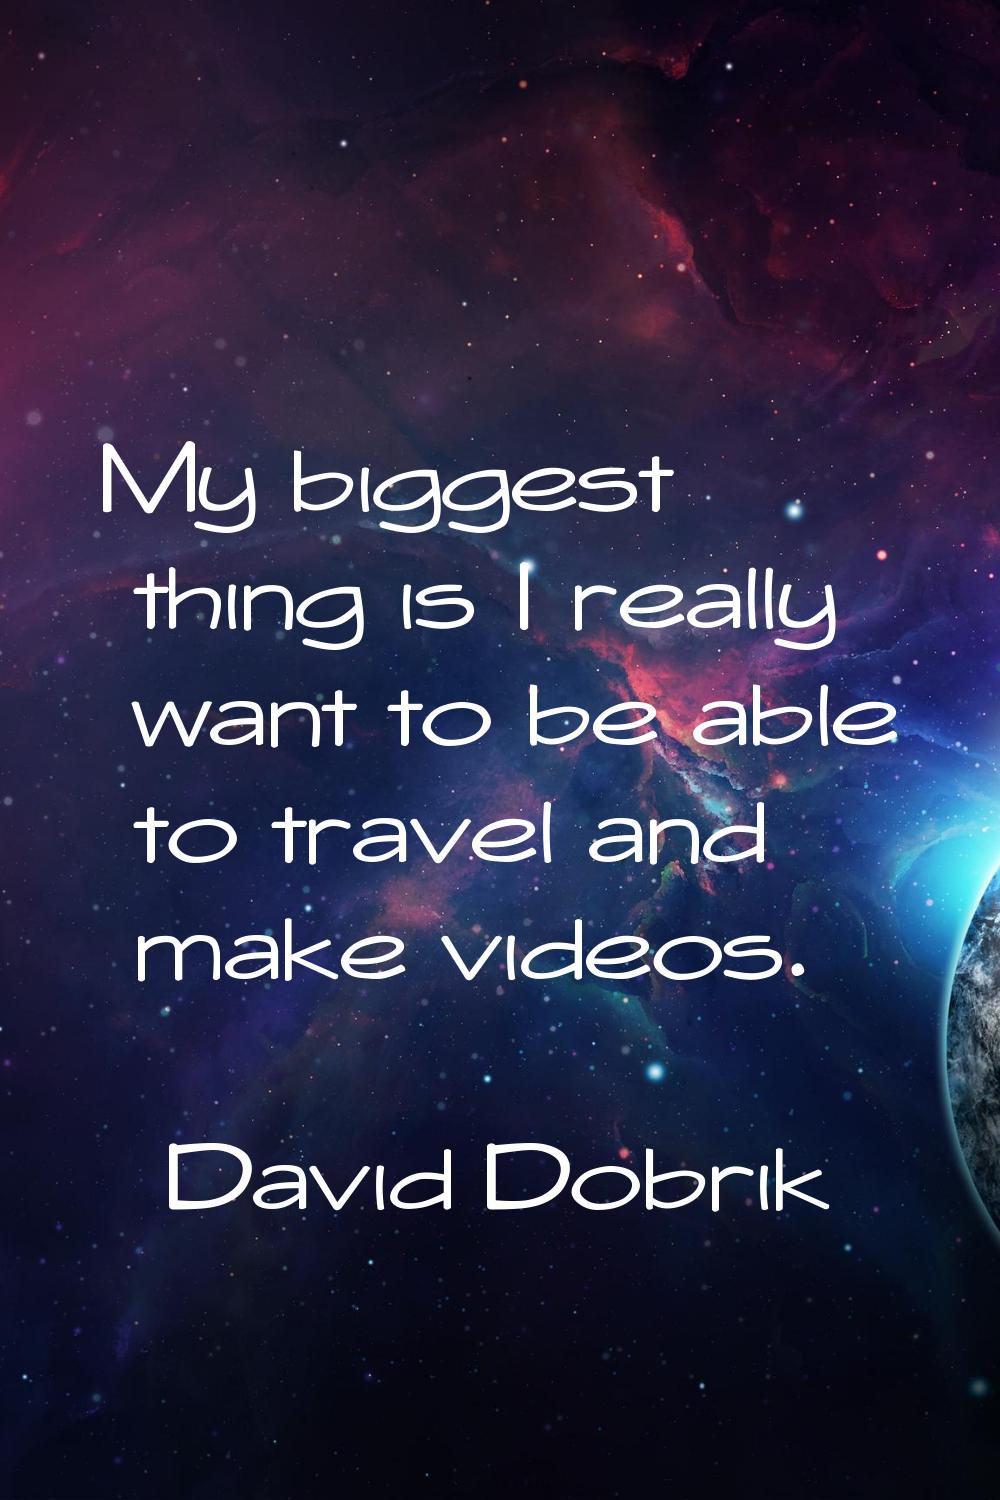 My biggest thing is I really want to be able to travel and make videos.